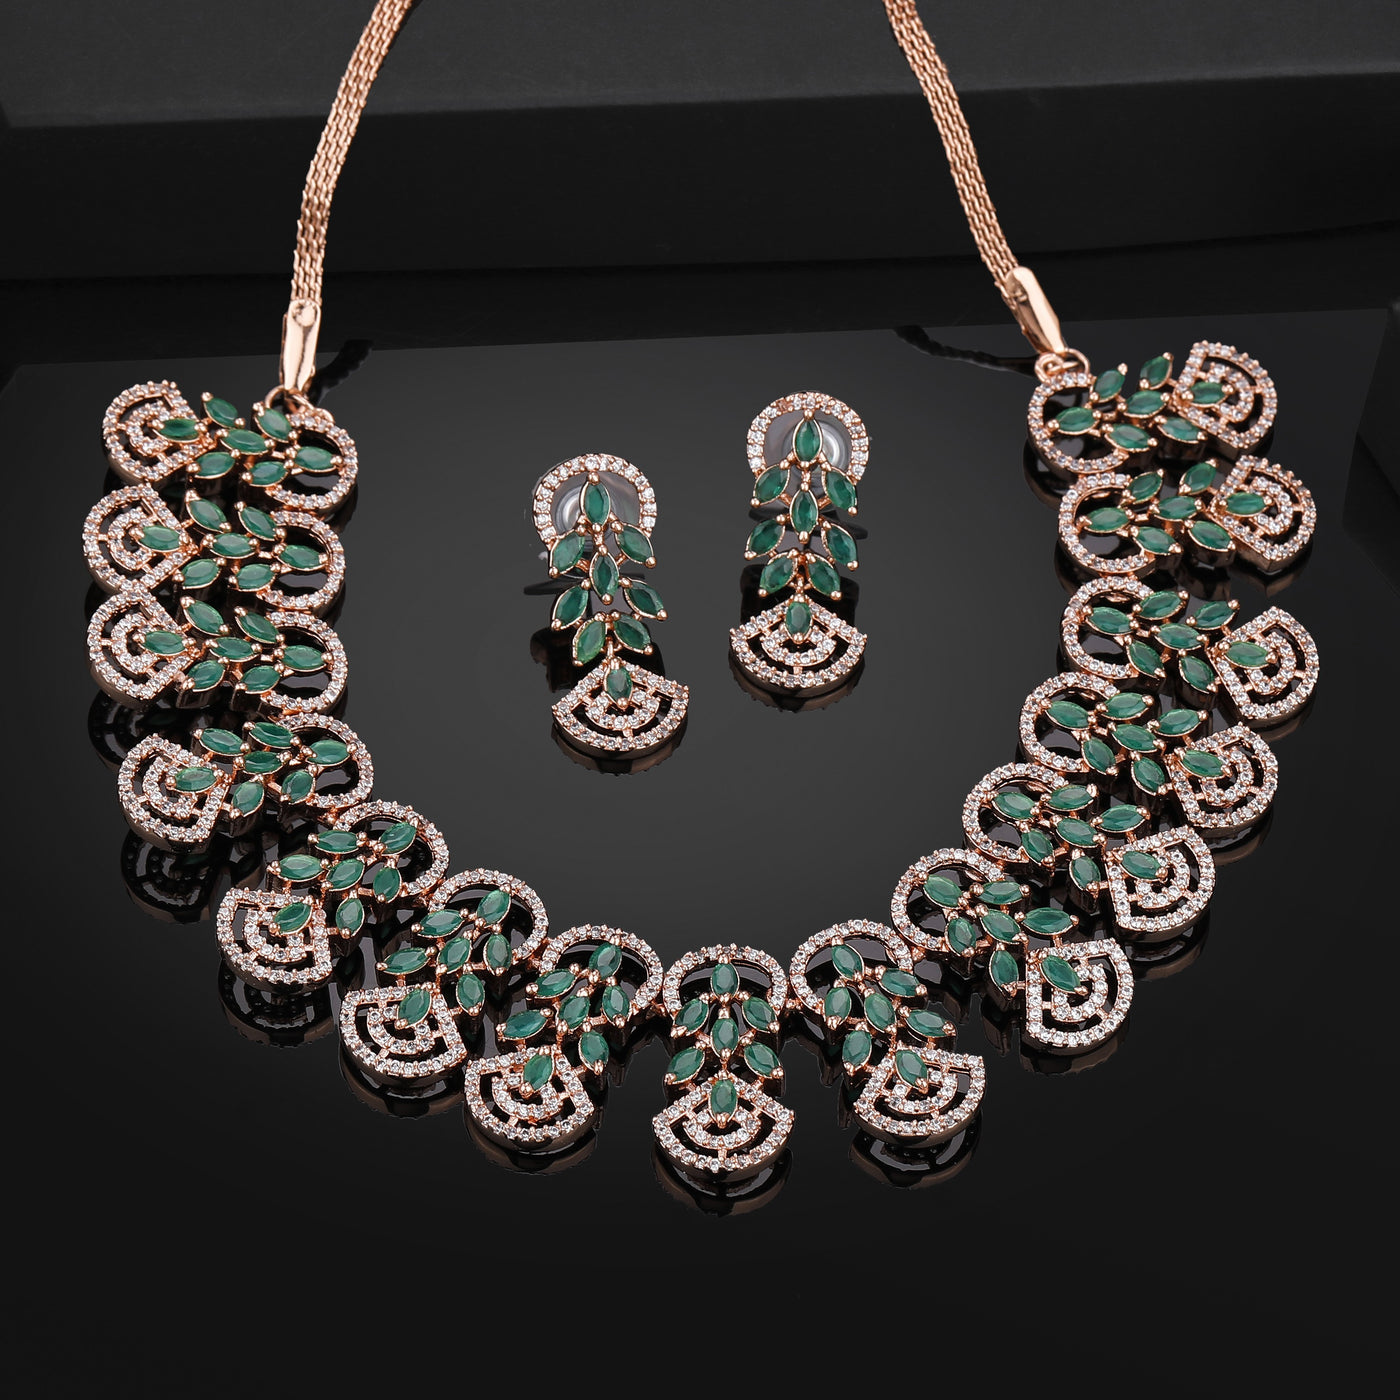 Estele Rose Gold Plated CZ Marquise Melody Necklace Set with Green Crystals for Women